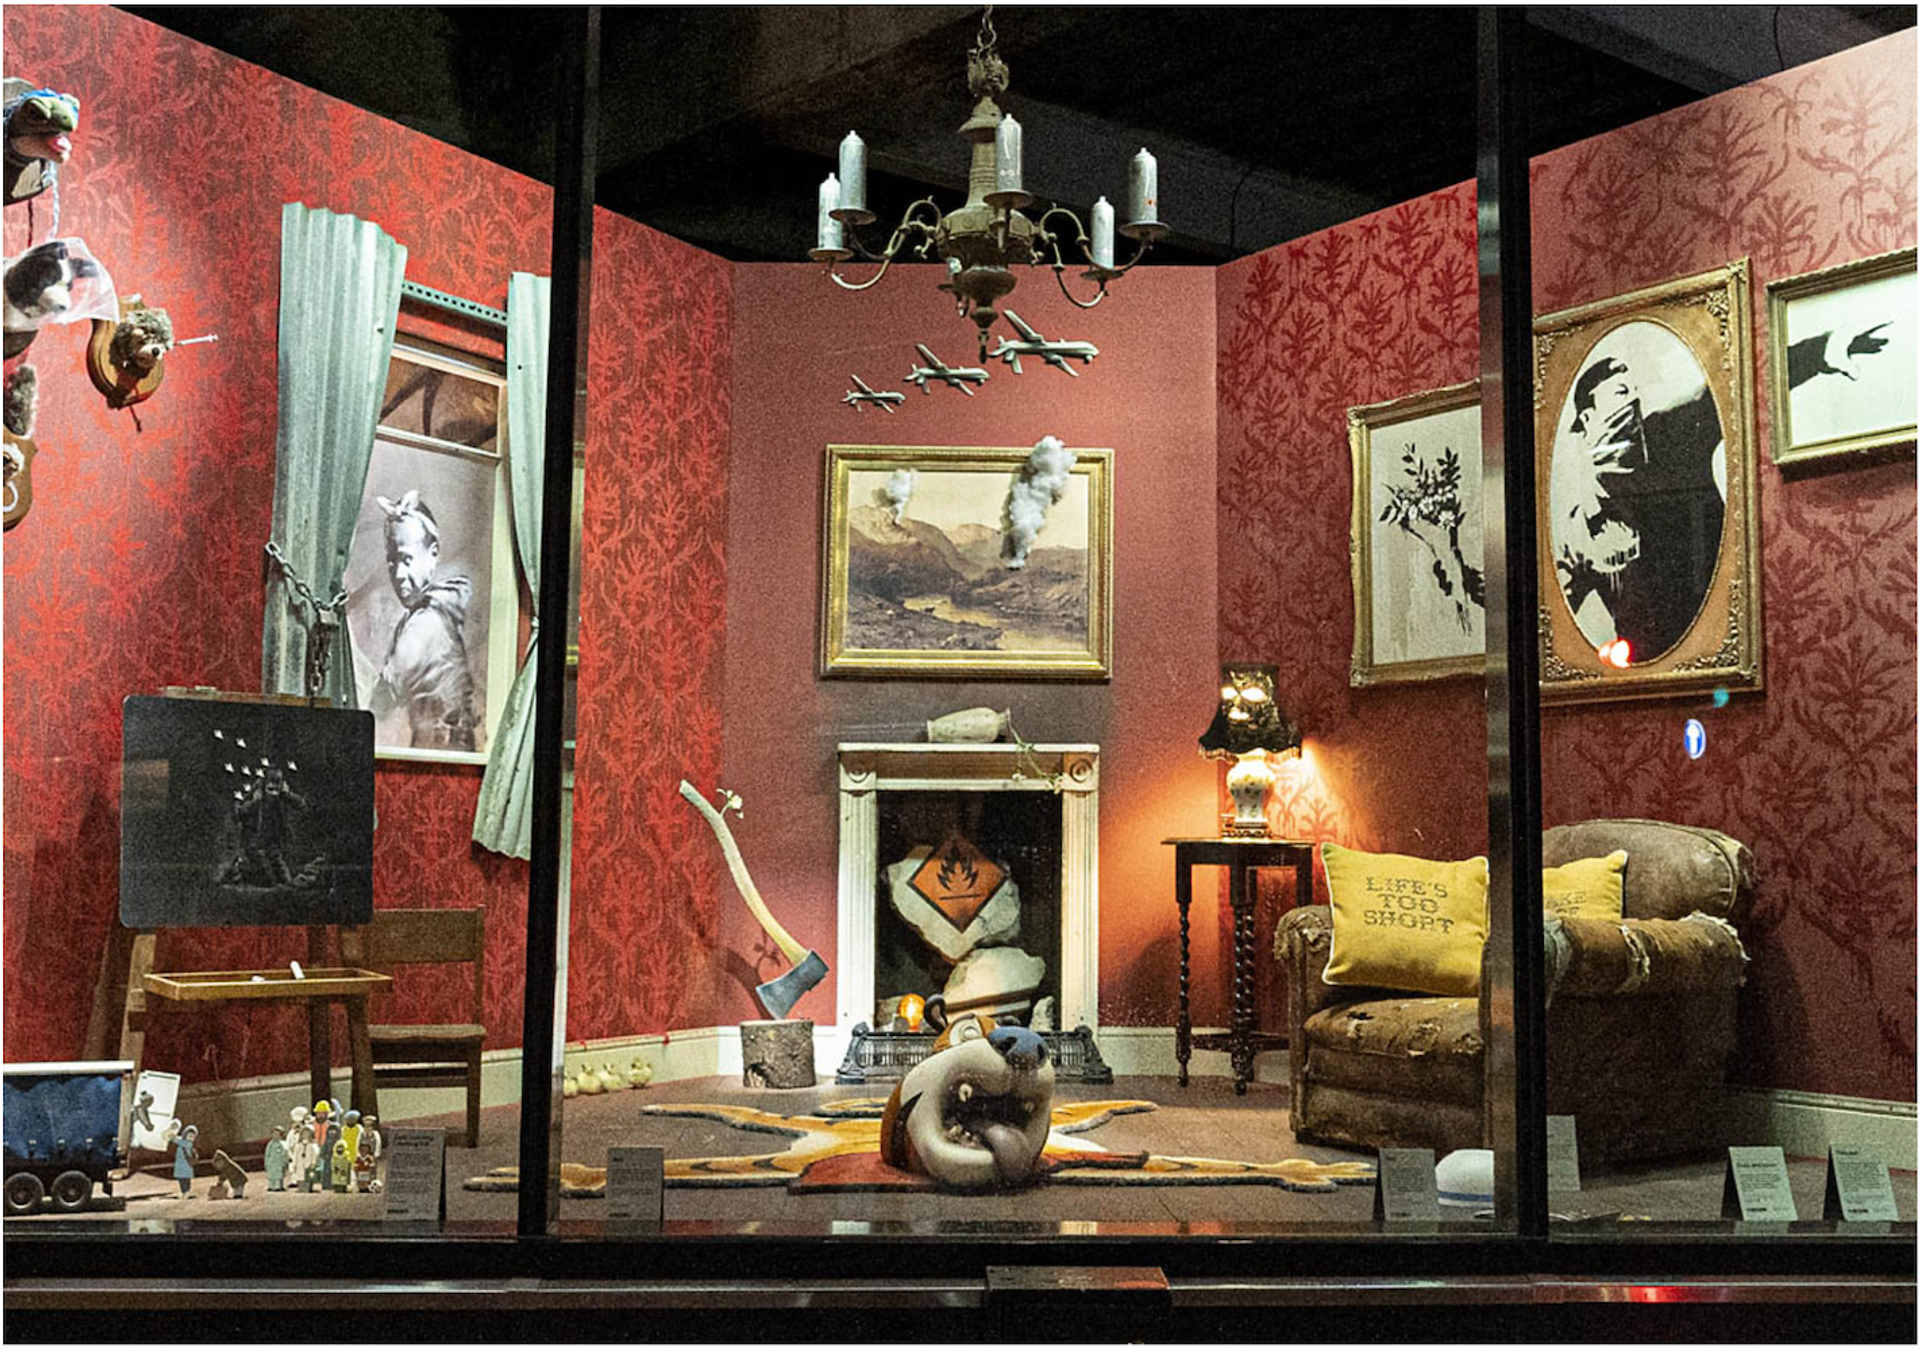 A photo showing the interior of Banksy's pop-up storefront, Gross Domestic Product, as seen through illuminated windows.